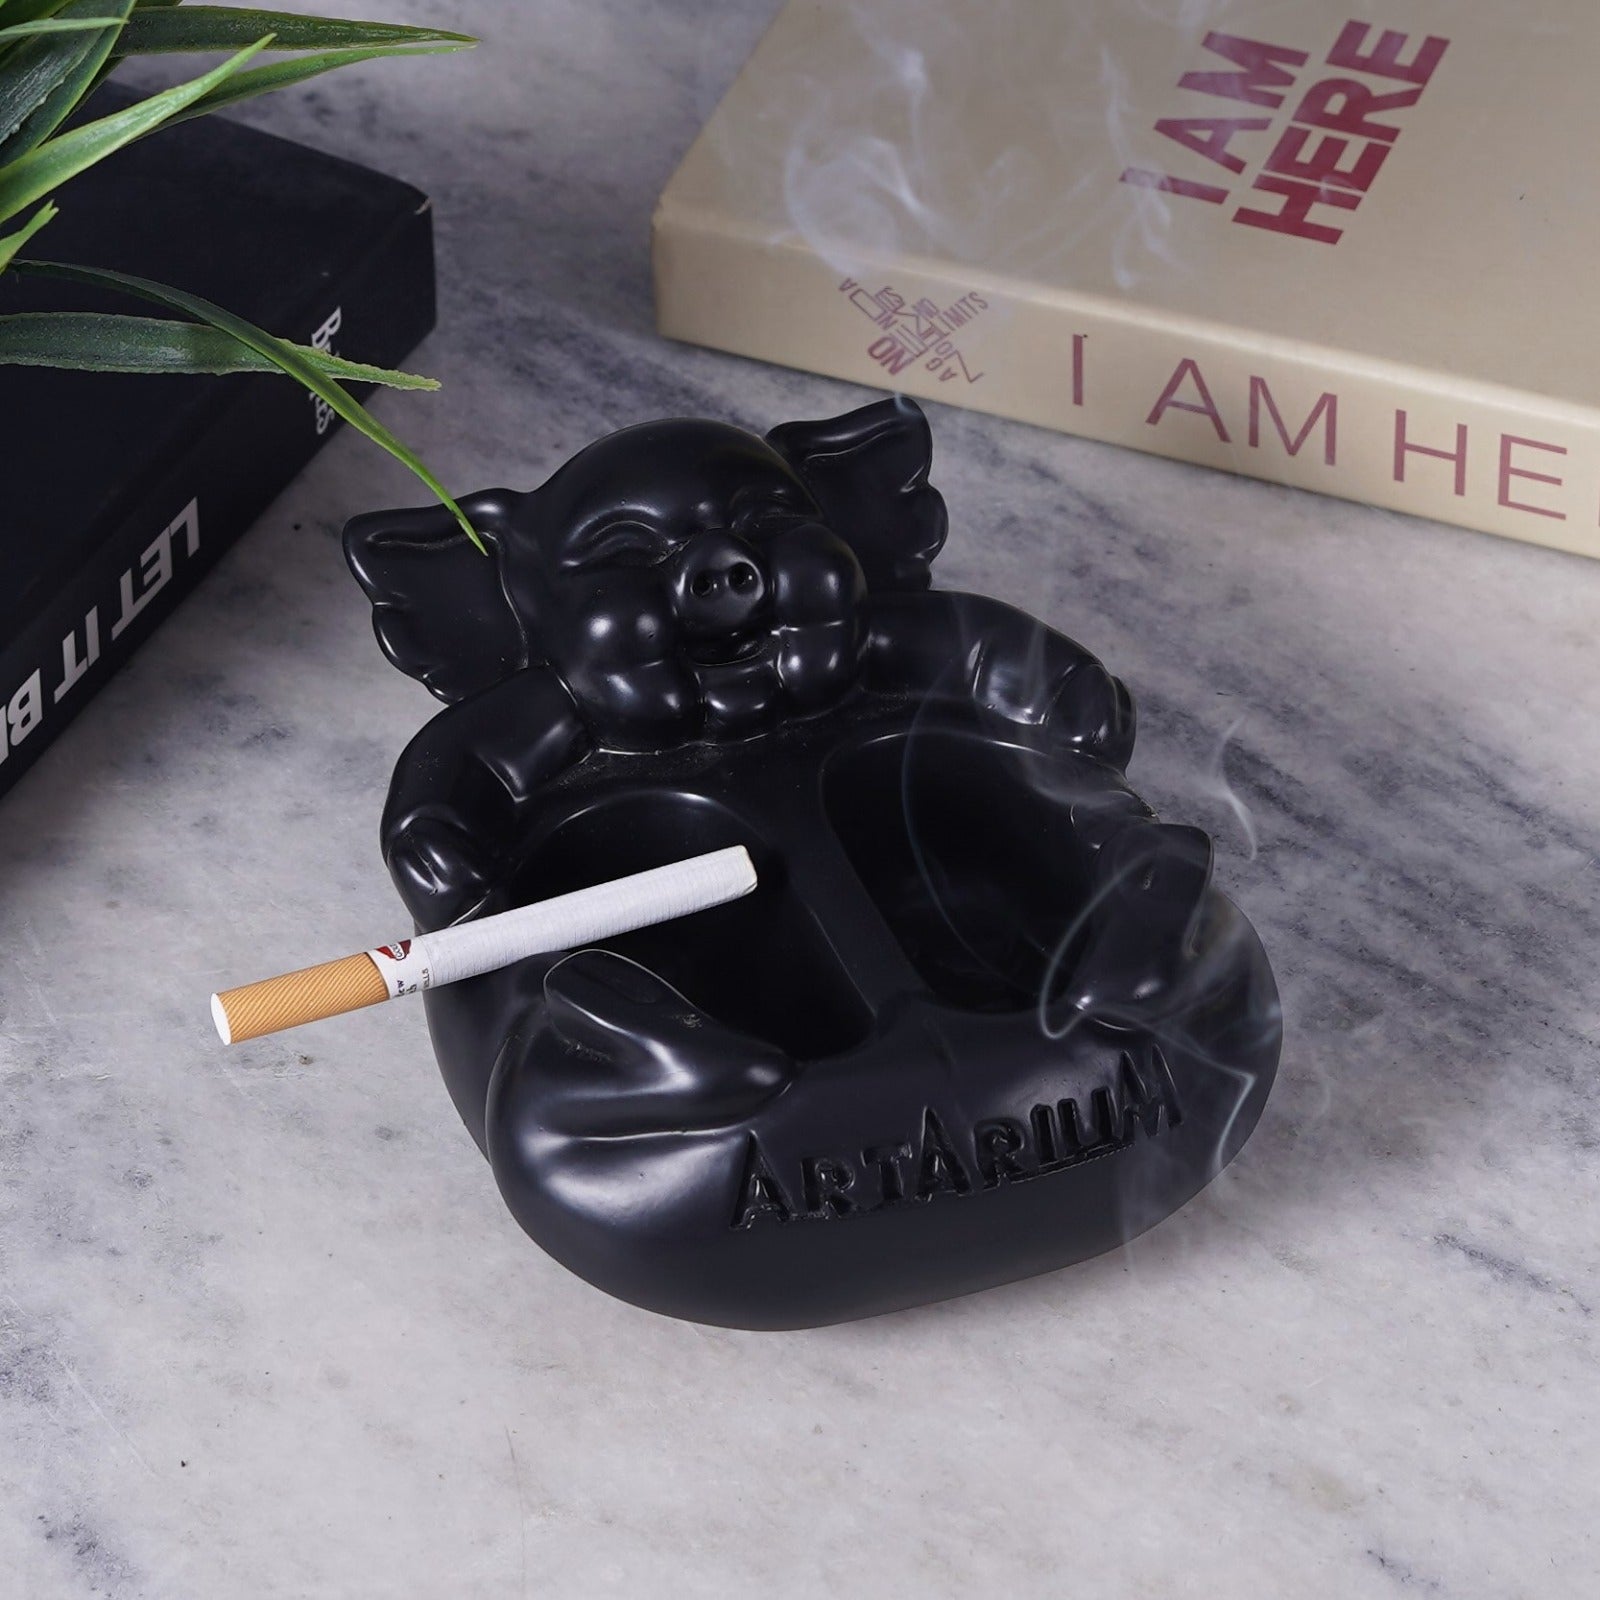 Check Out Some Cool Ashtrays by Artarium - Buy Now – theartarium